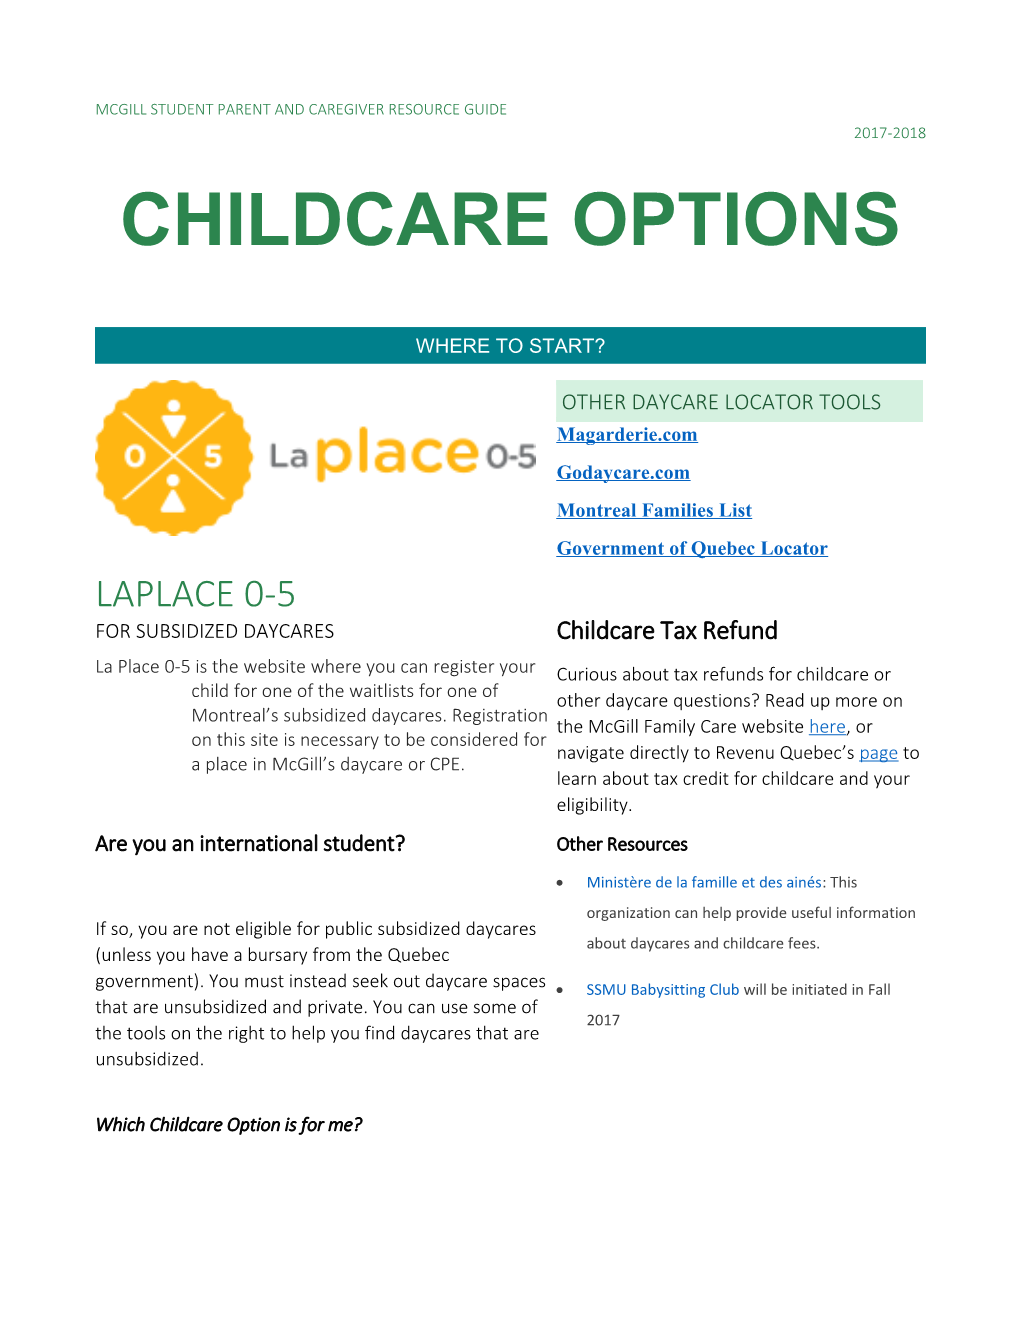 Other Daycare Locator Tools